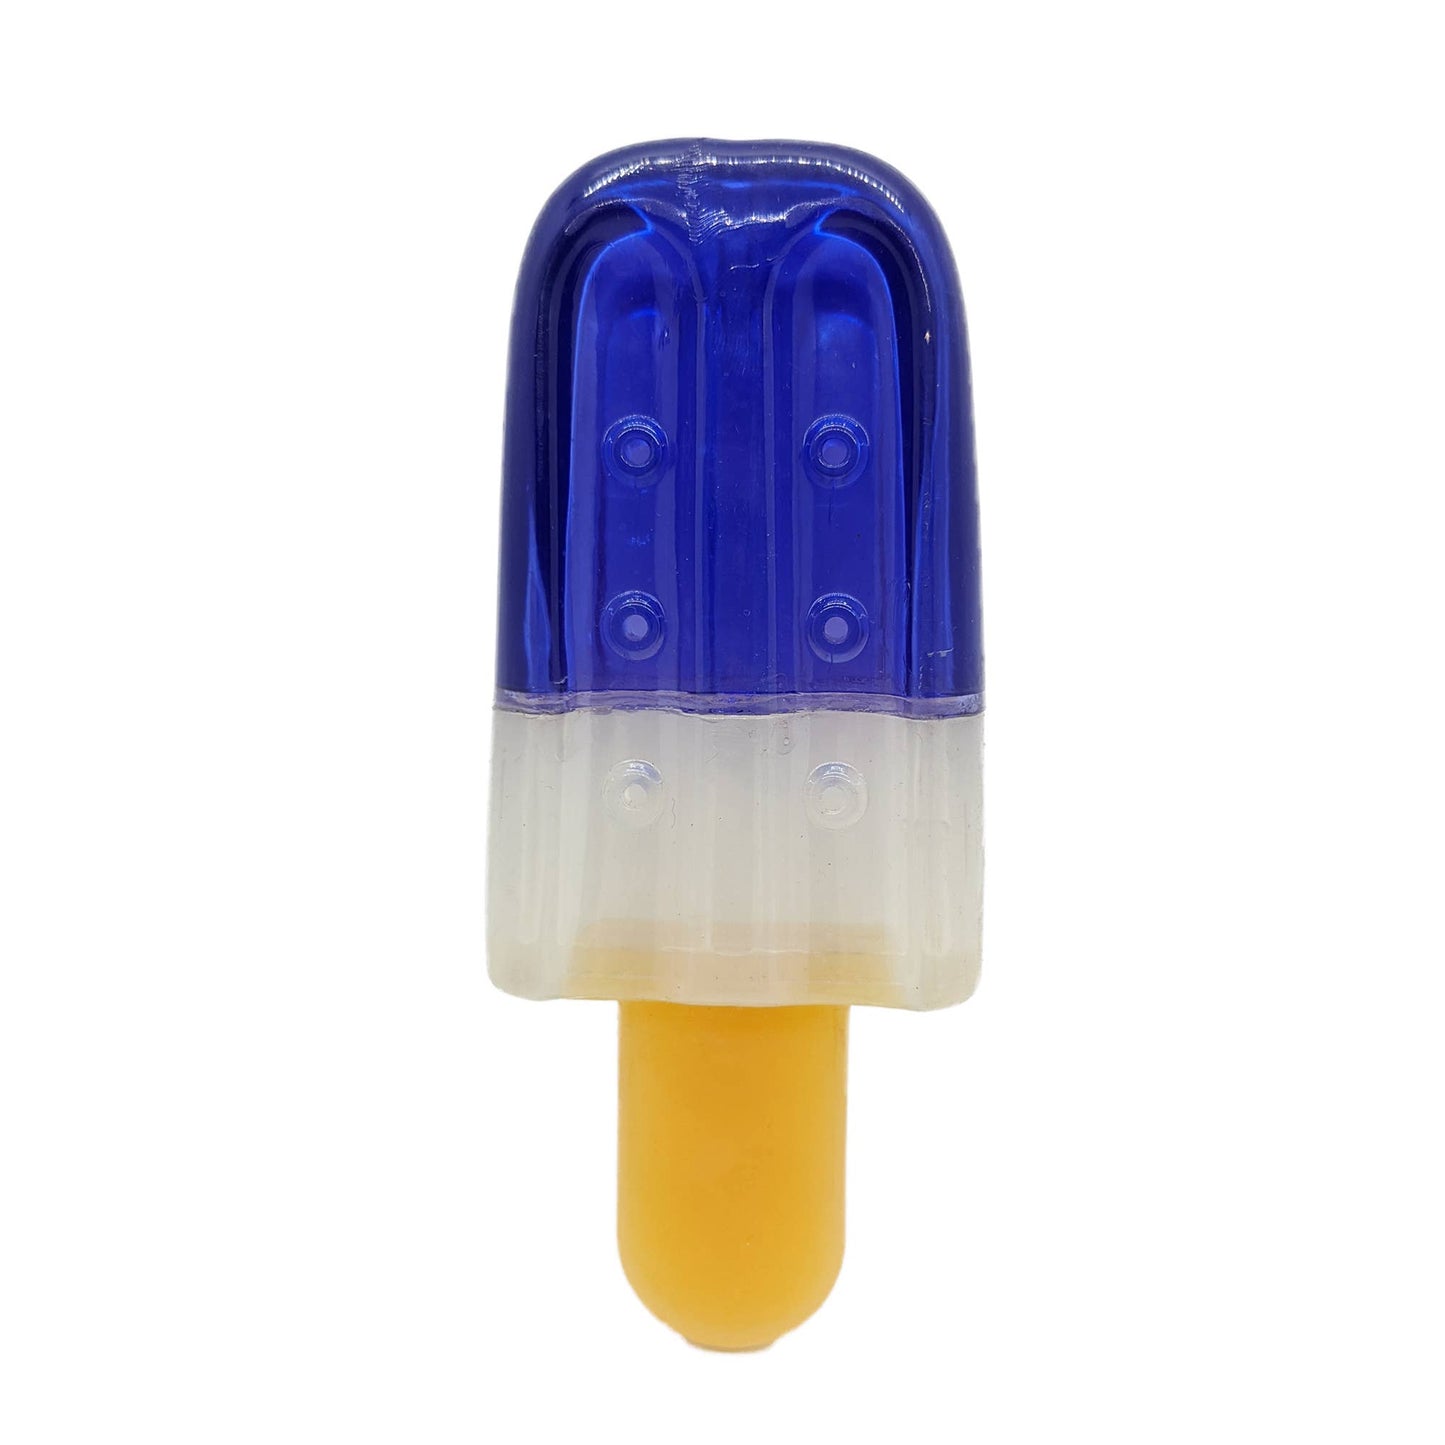 The Power Chewer Pupsicle Treat Dog Toy